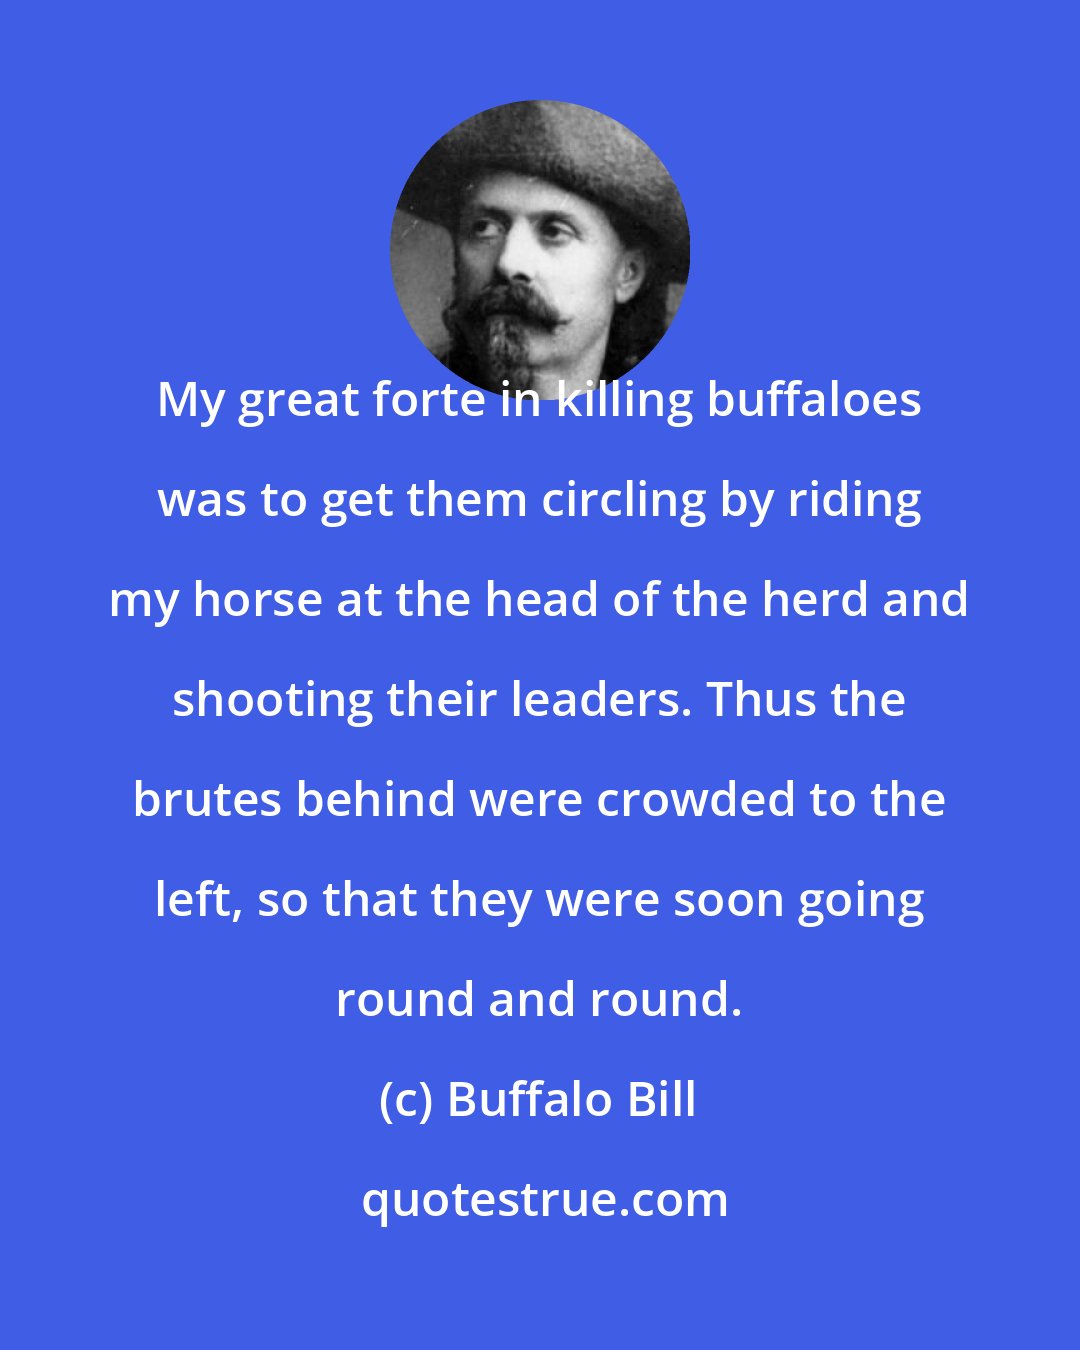 Buffalo Bill: My great forte in killing buffaloes was to get them circling by riding my horse at the head of the herd and shooting their leaders. Thus the brutes behind were crowded to the left, so that they were soon going round and round.